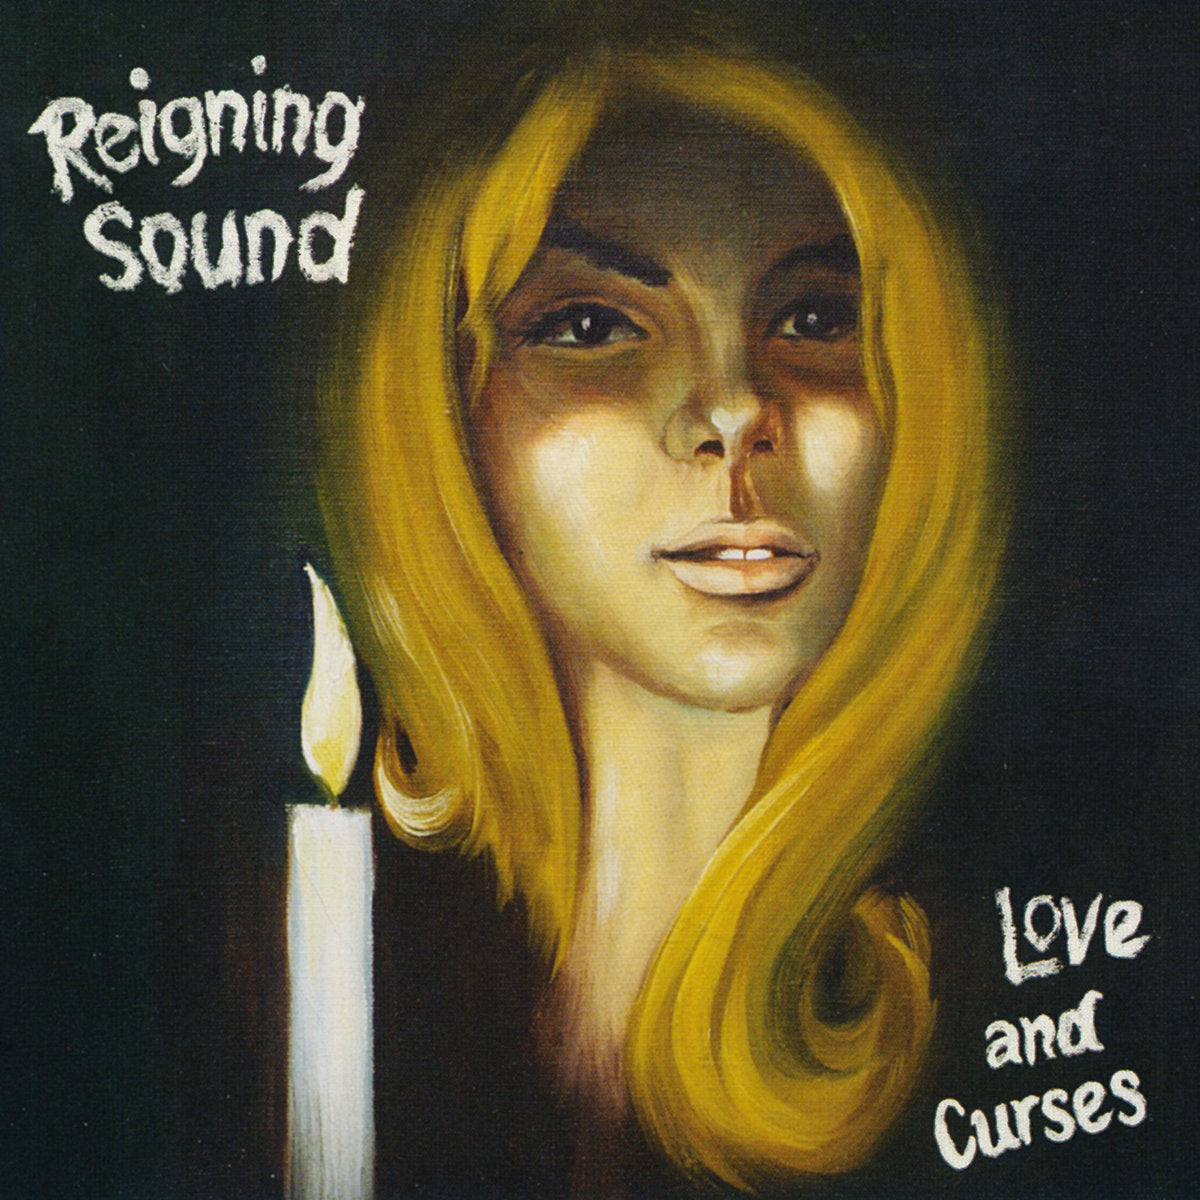 Reigning Sound - Love and Curses LP